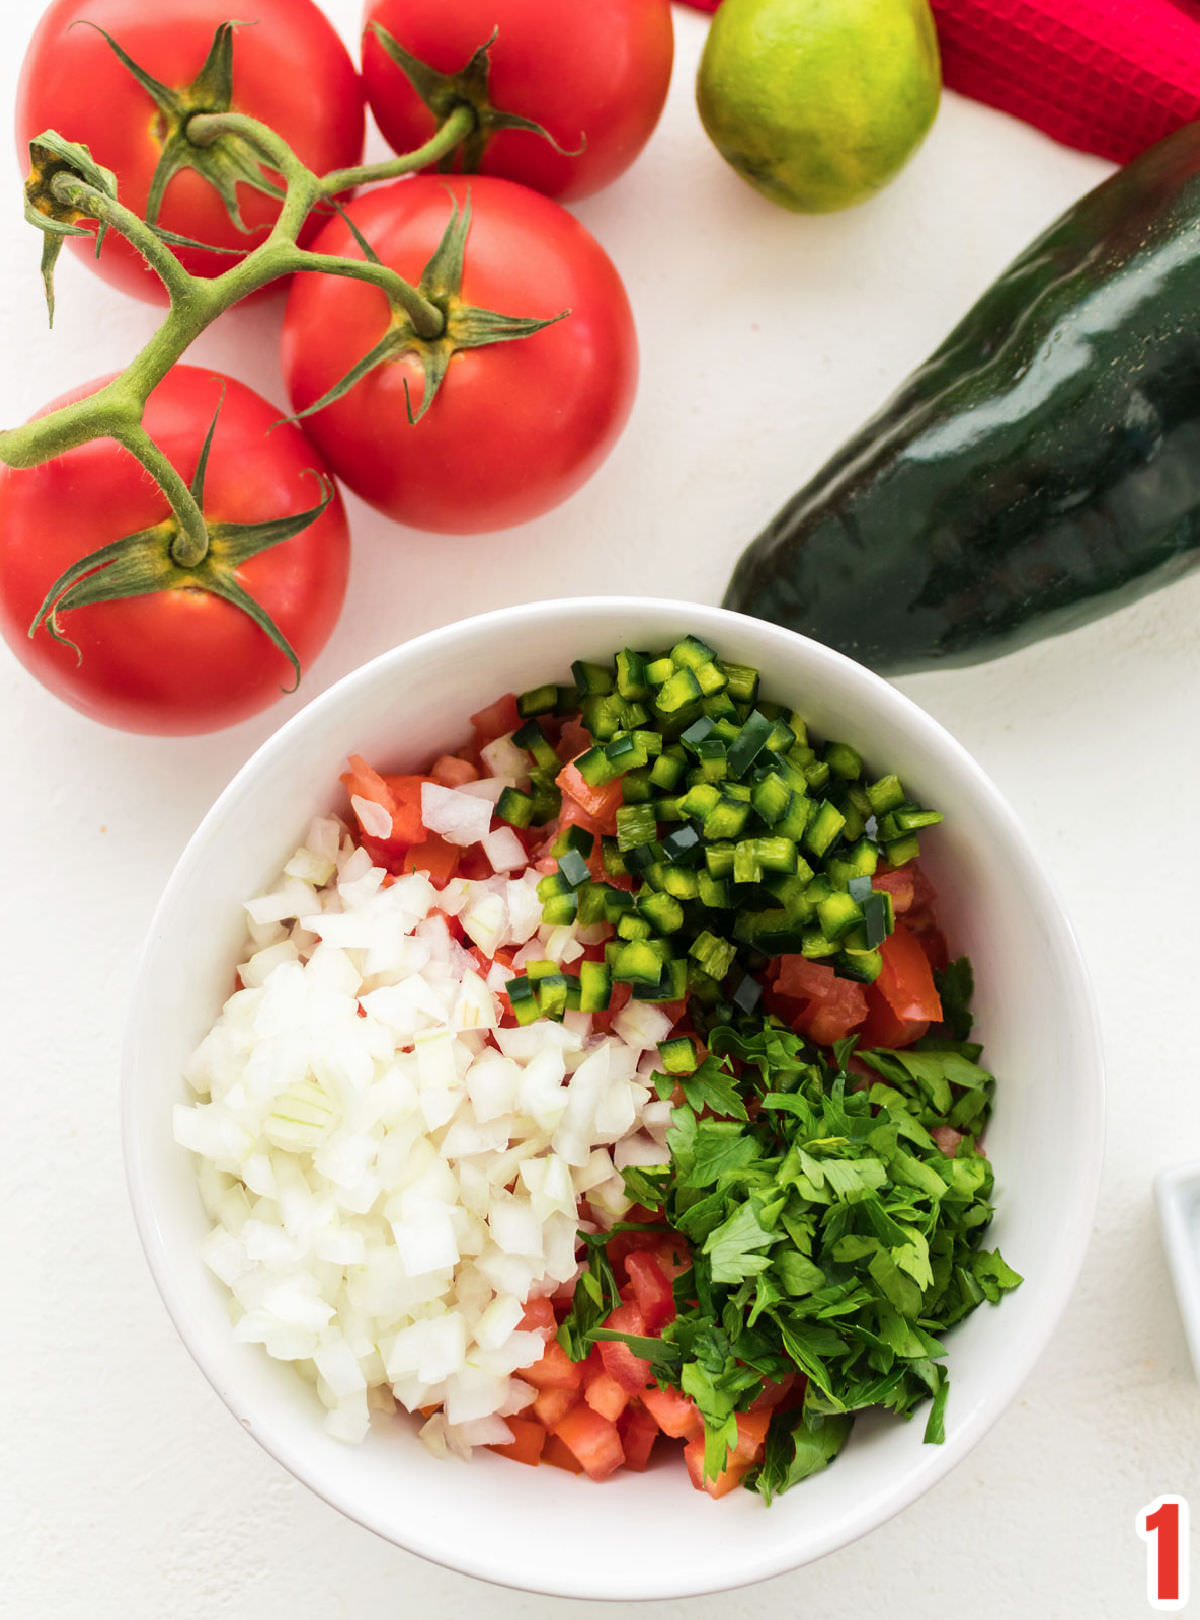 White bowl filled with diced tomatoes, onions, pablono peppers and cilantro sitting in front of tomatoes on the vine, lime and a pepper.